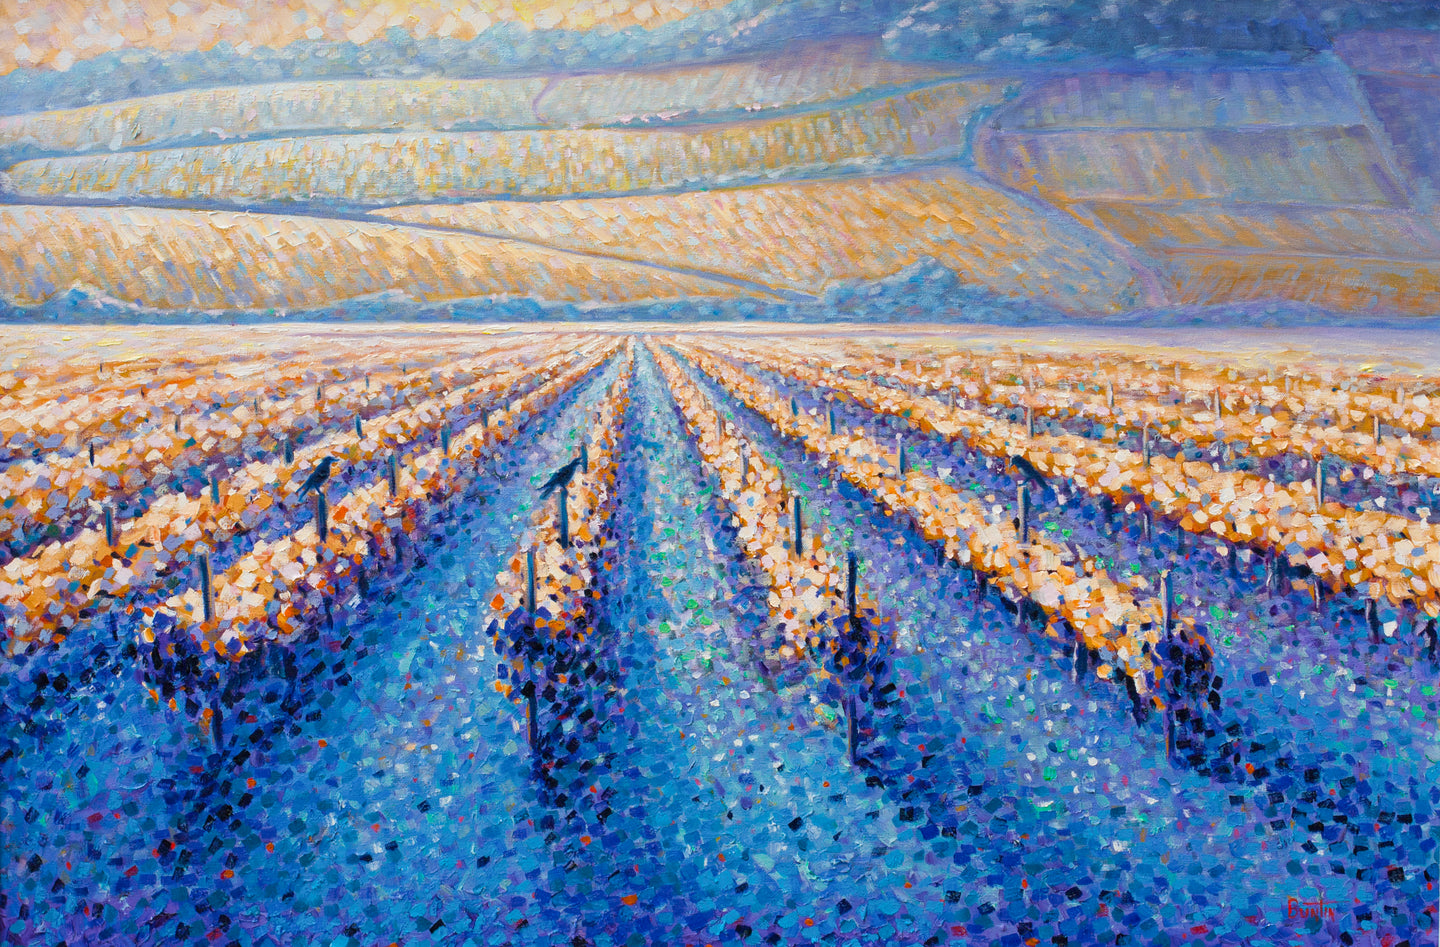 Golden Vineyards - Hand embellished giclee on canvas 24x36in